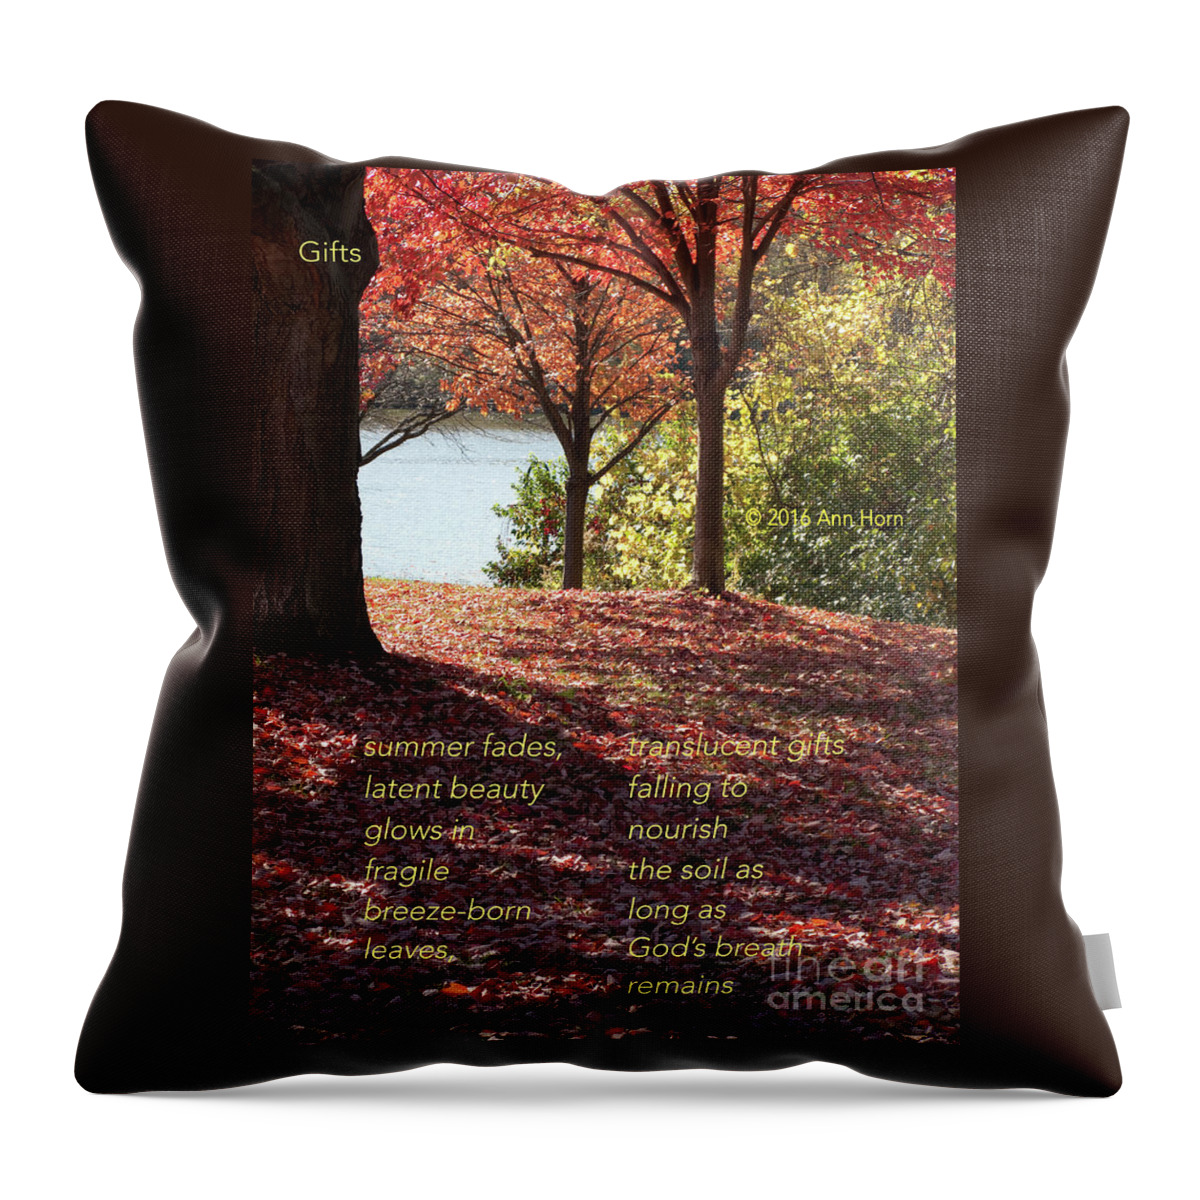 Autumn Throw Pillow featuring the photograph Gifts by Ann Horn